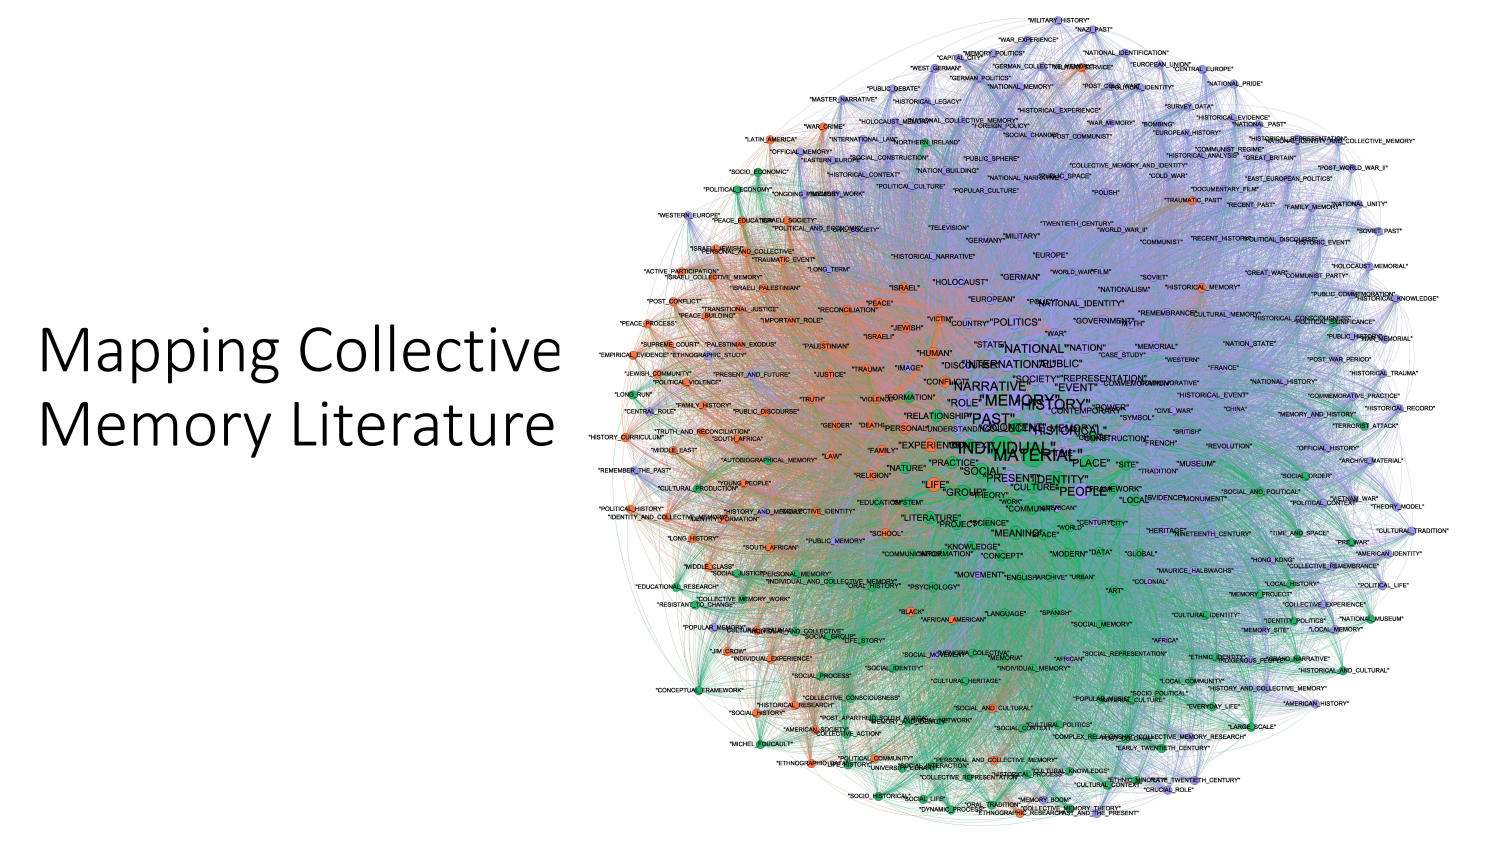 Mapping Collective Memory In Knowledge Management Slide 7 Unt Digital Library